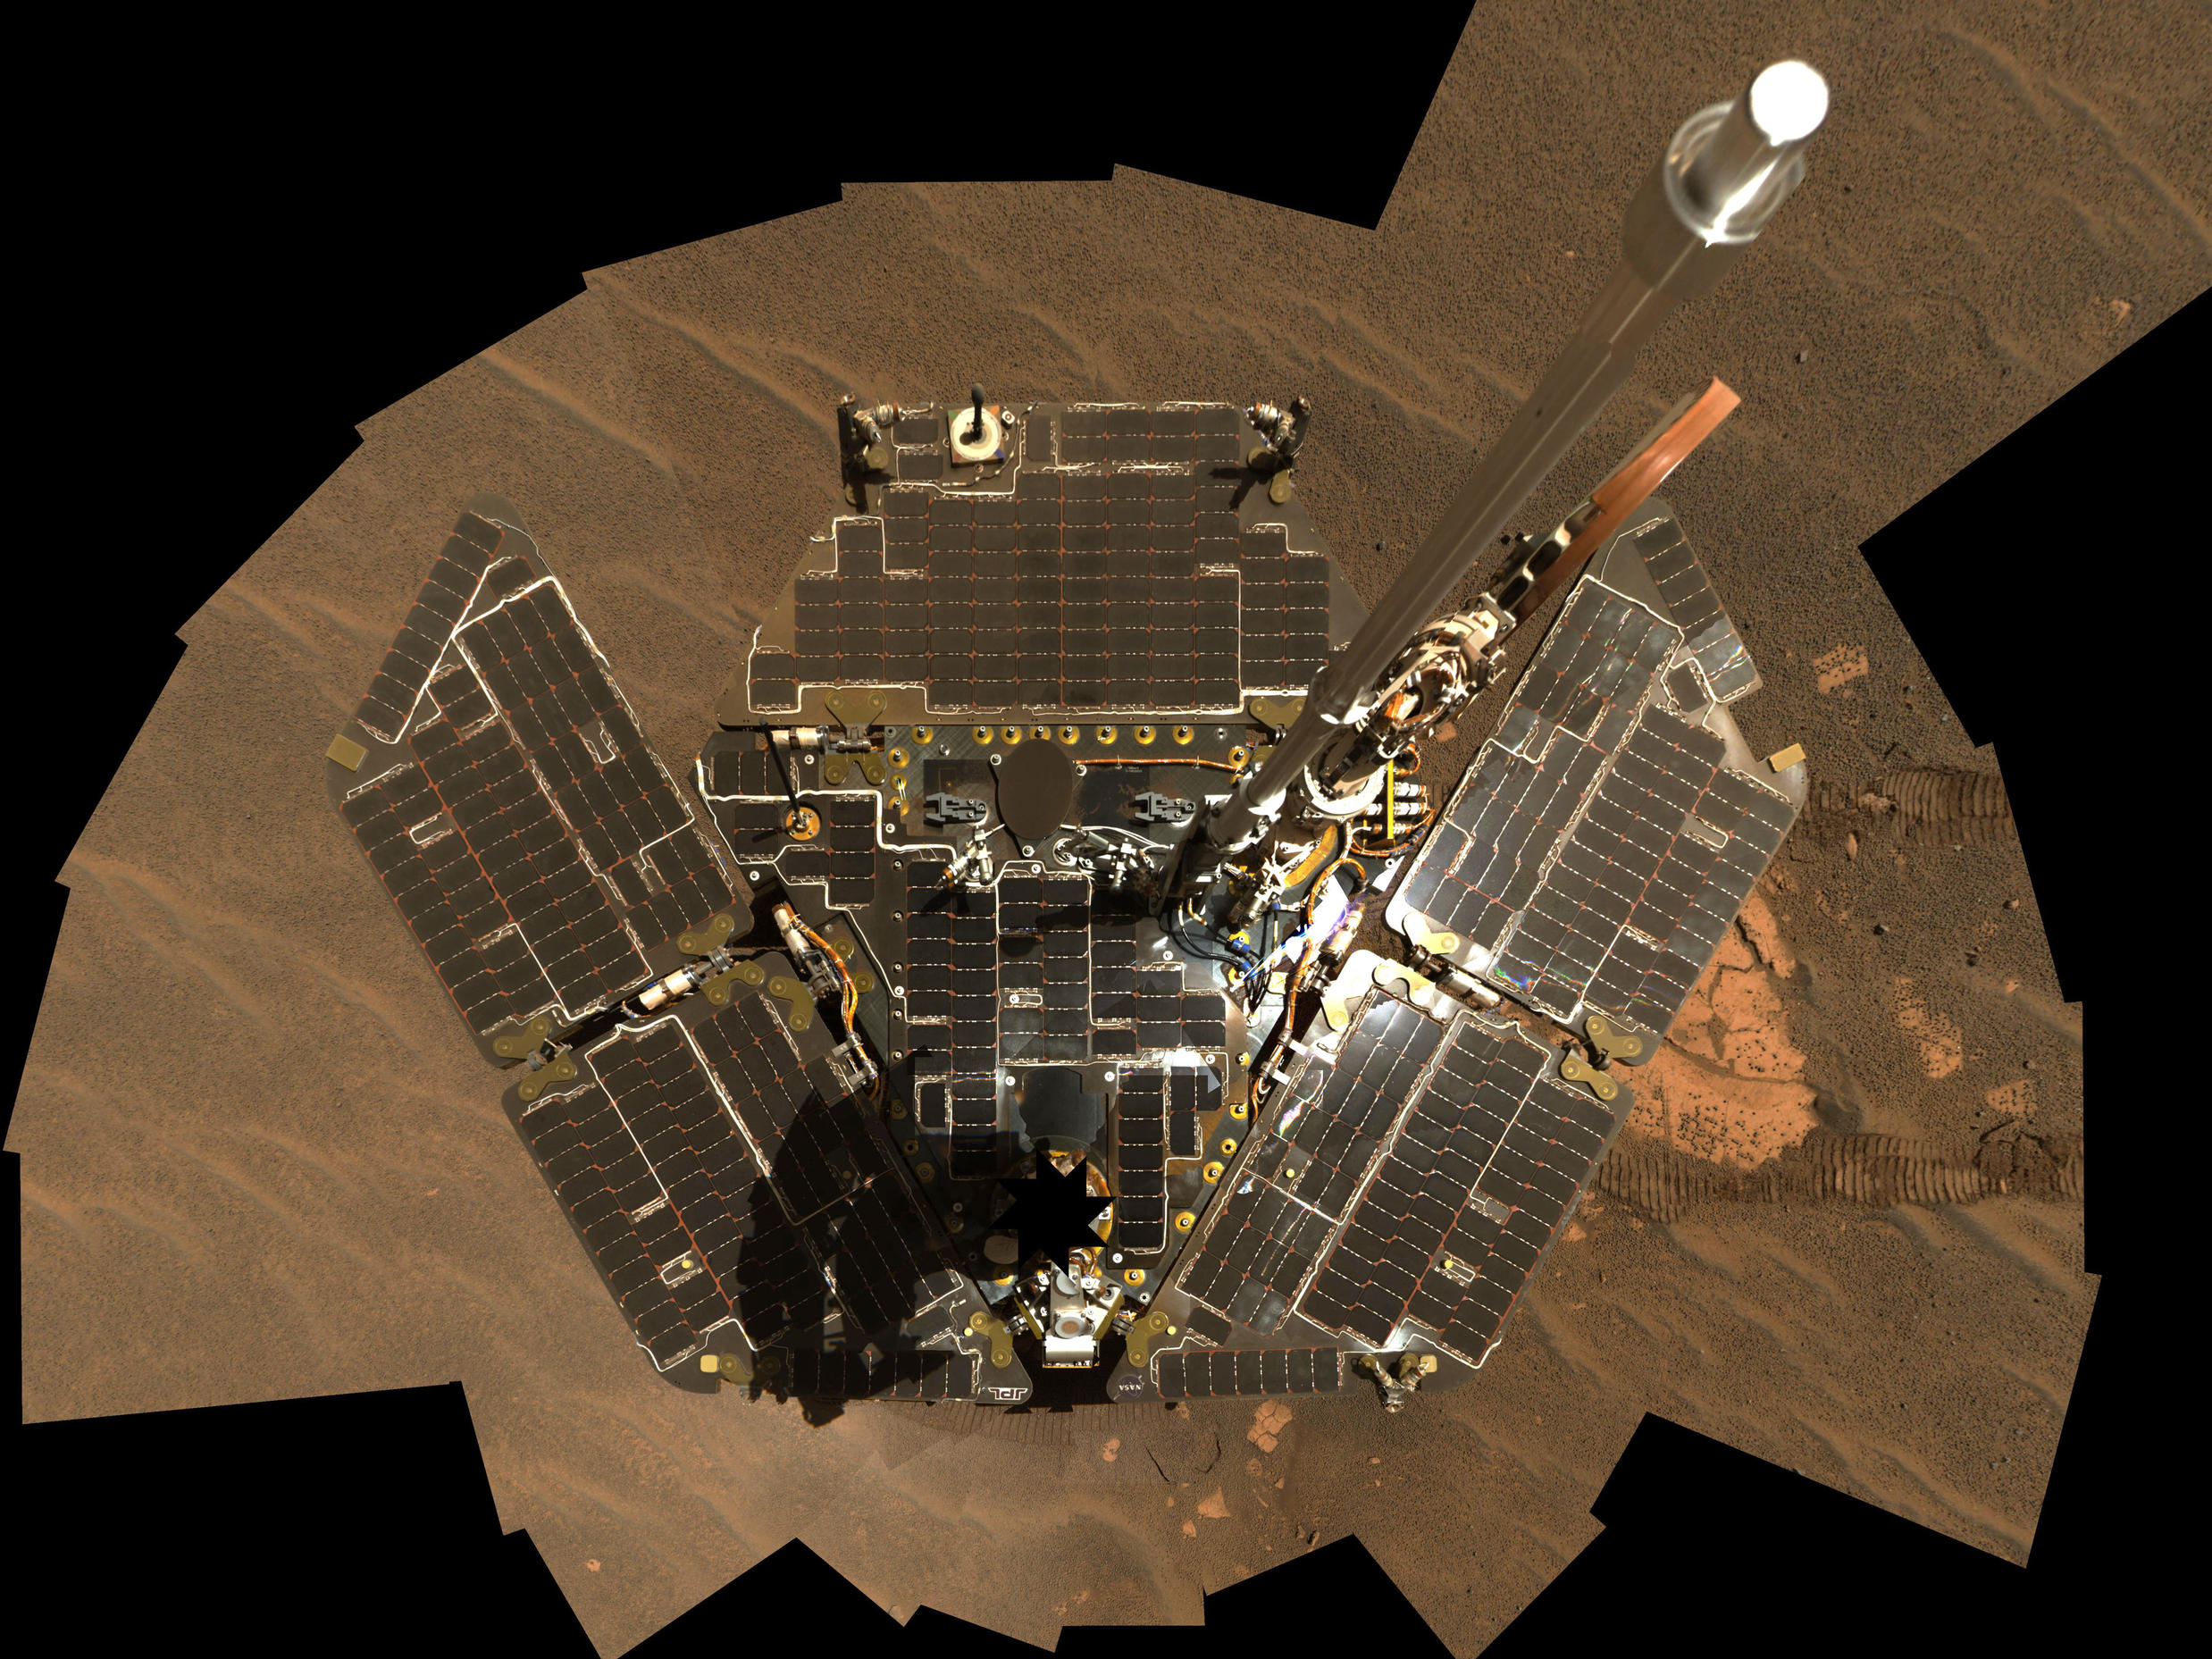 Mars’ skies are clearing up, but the Opportunity rover is still fast asleep